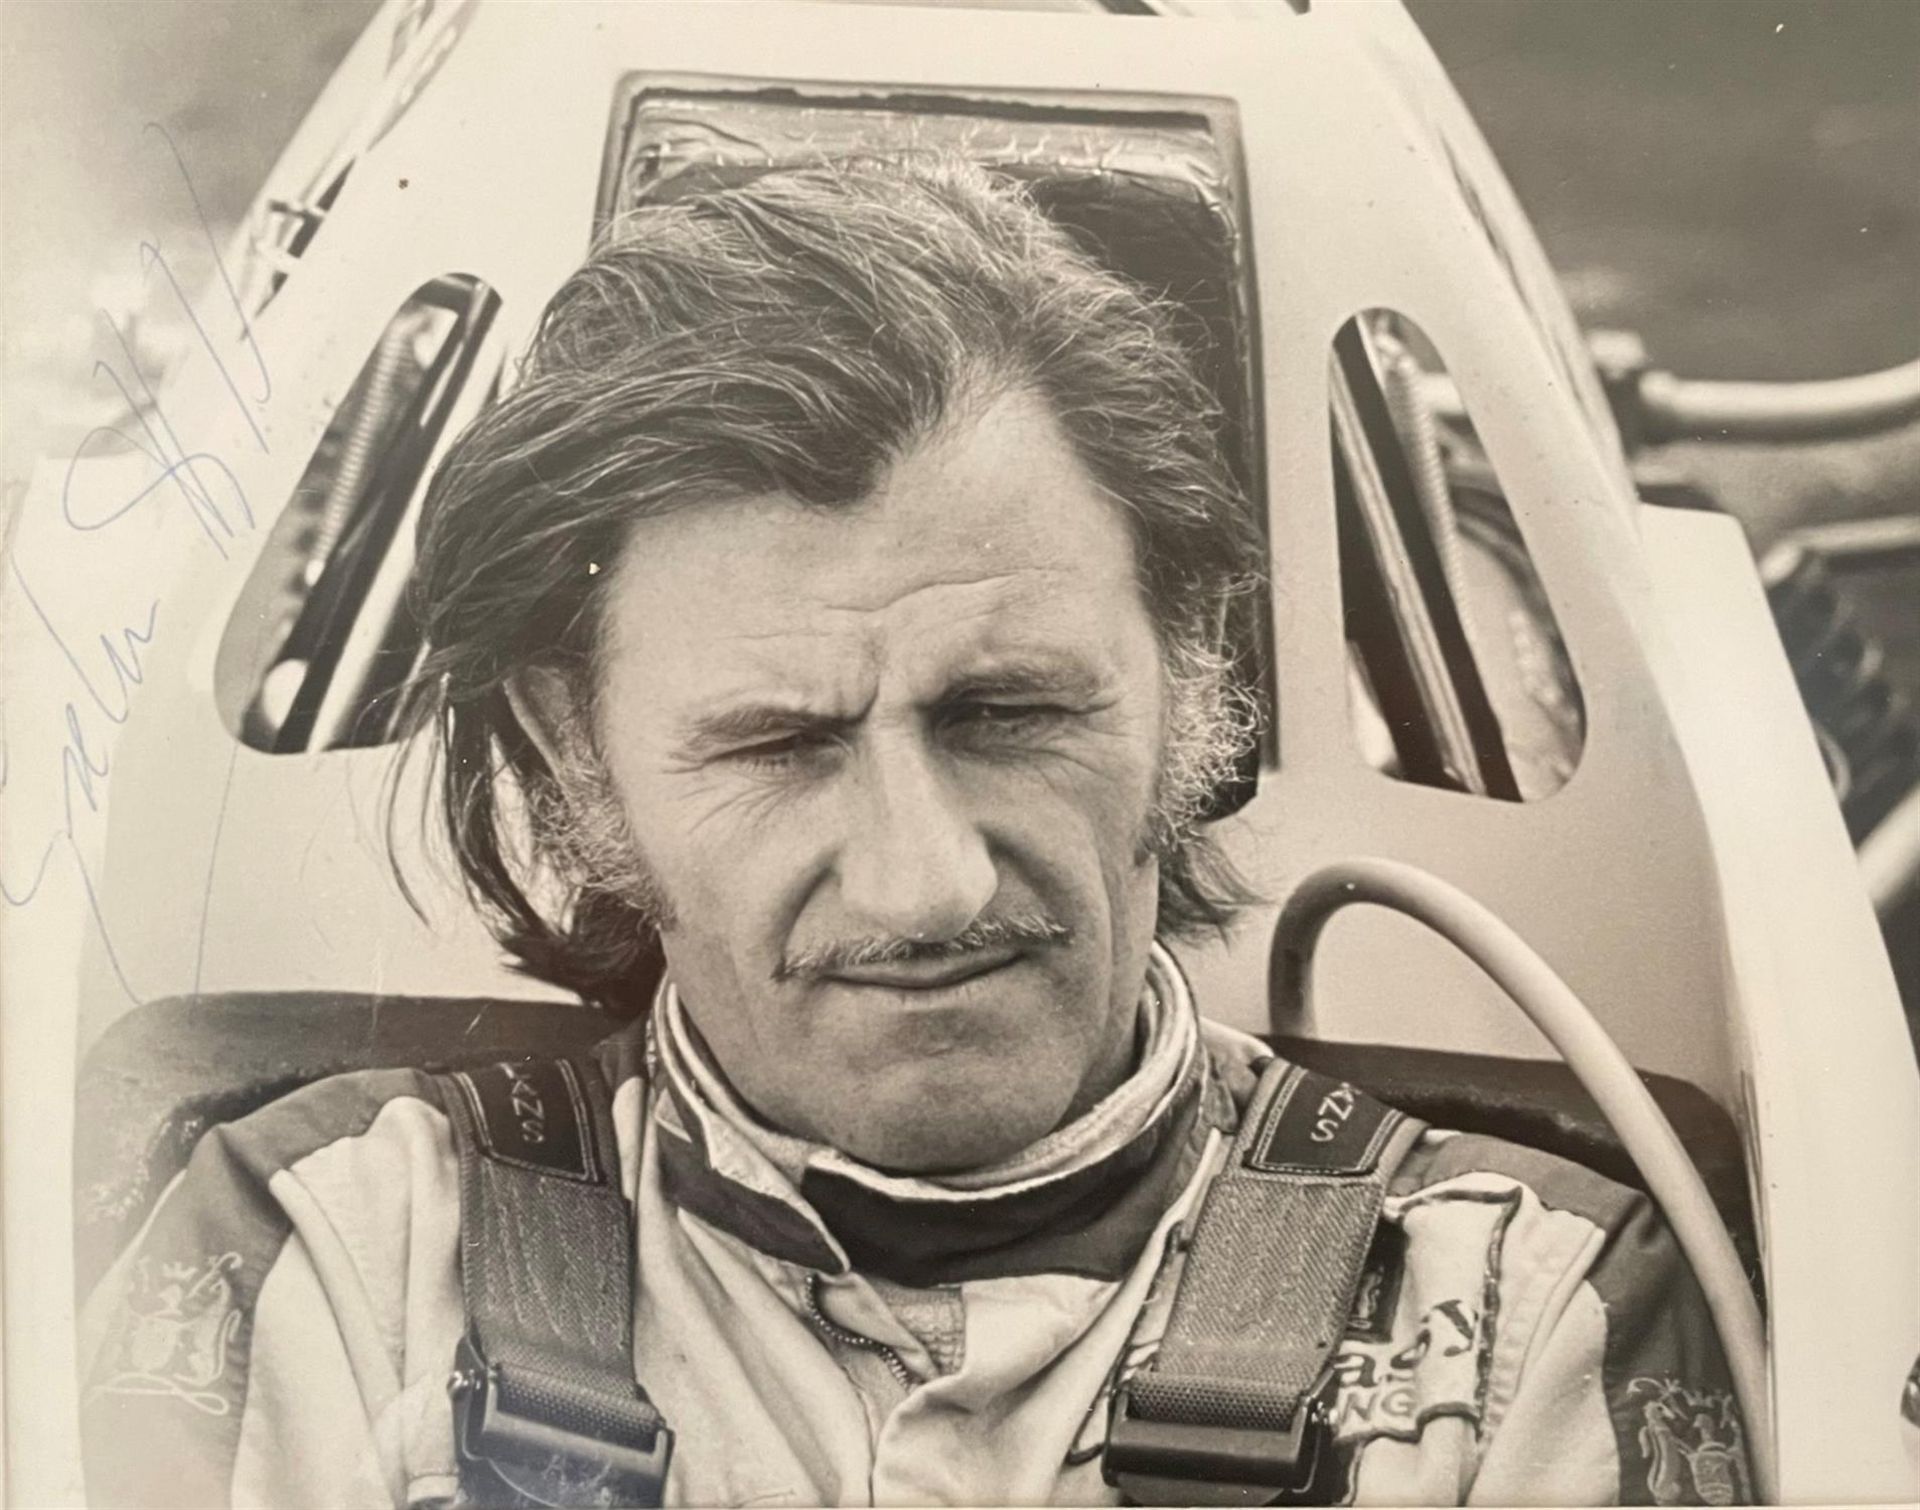 Four Original Photographic Prints of Graham Hill from the 1974 British Grand Prix* - Image 3 of 10